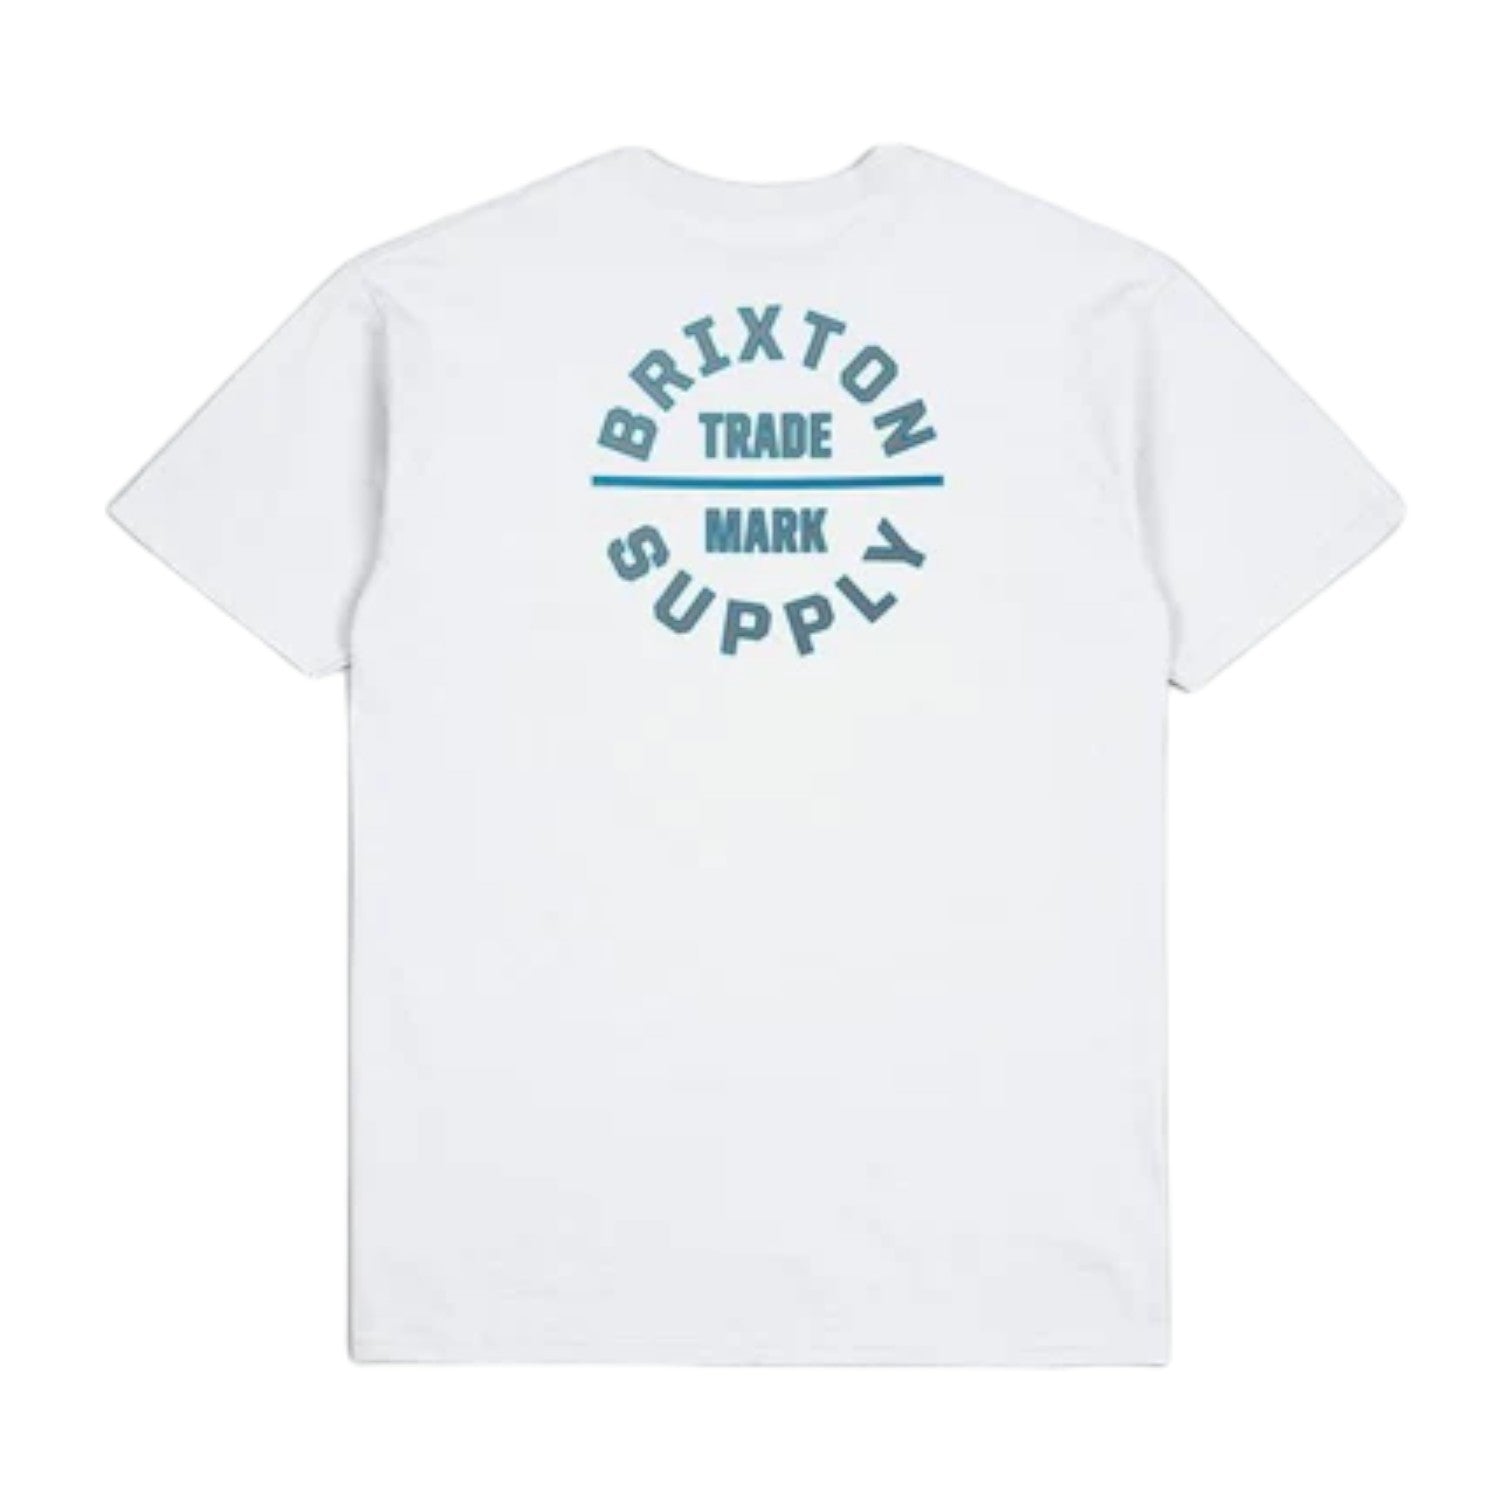 Brixton Oath V S/S Standard Tee - White/Chinois Green